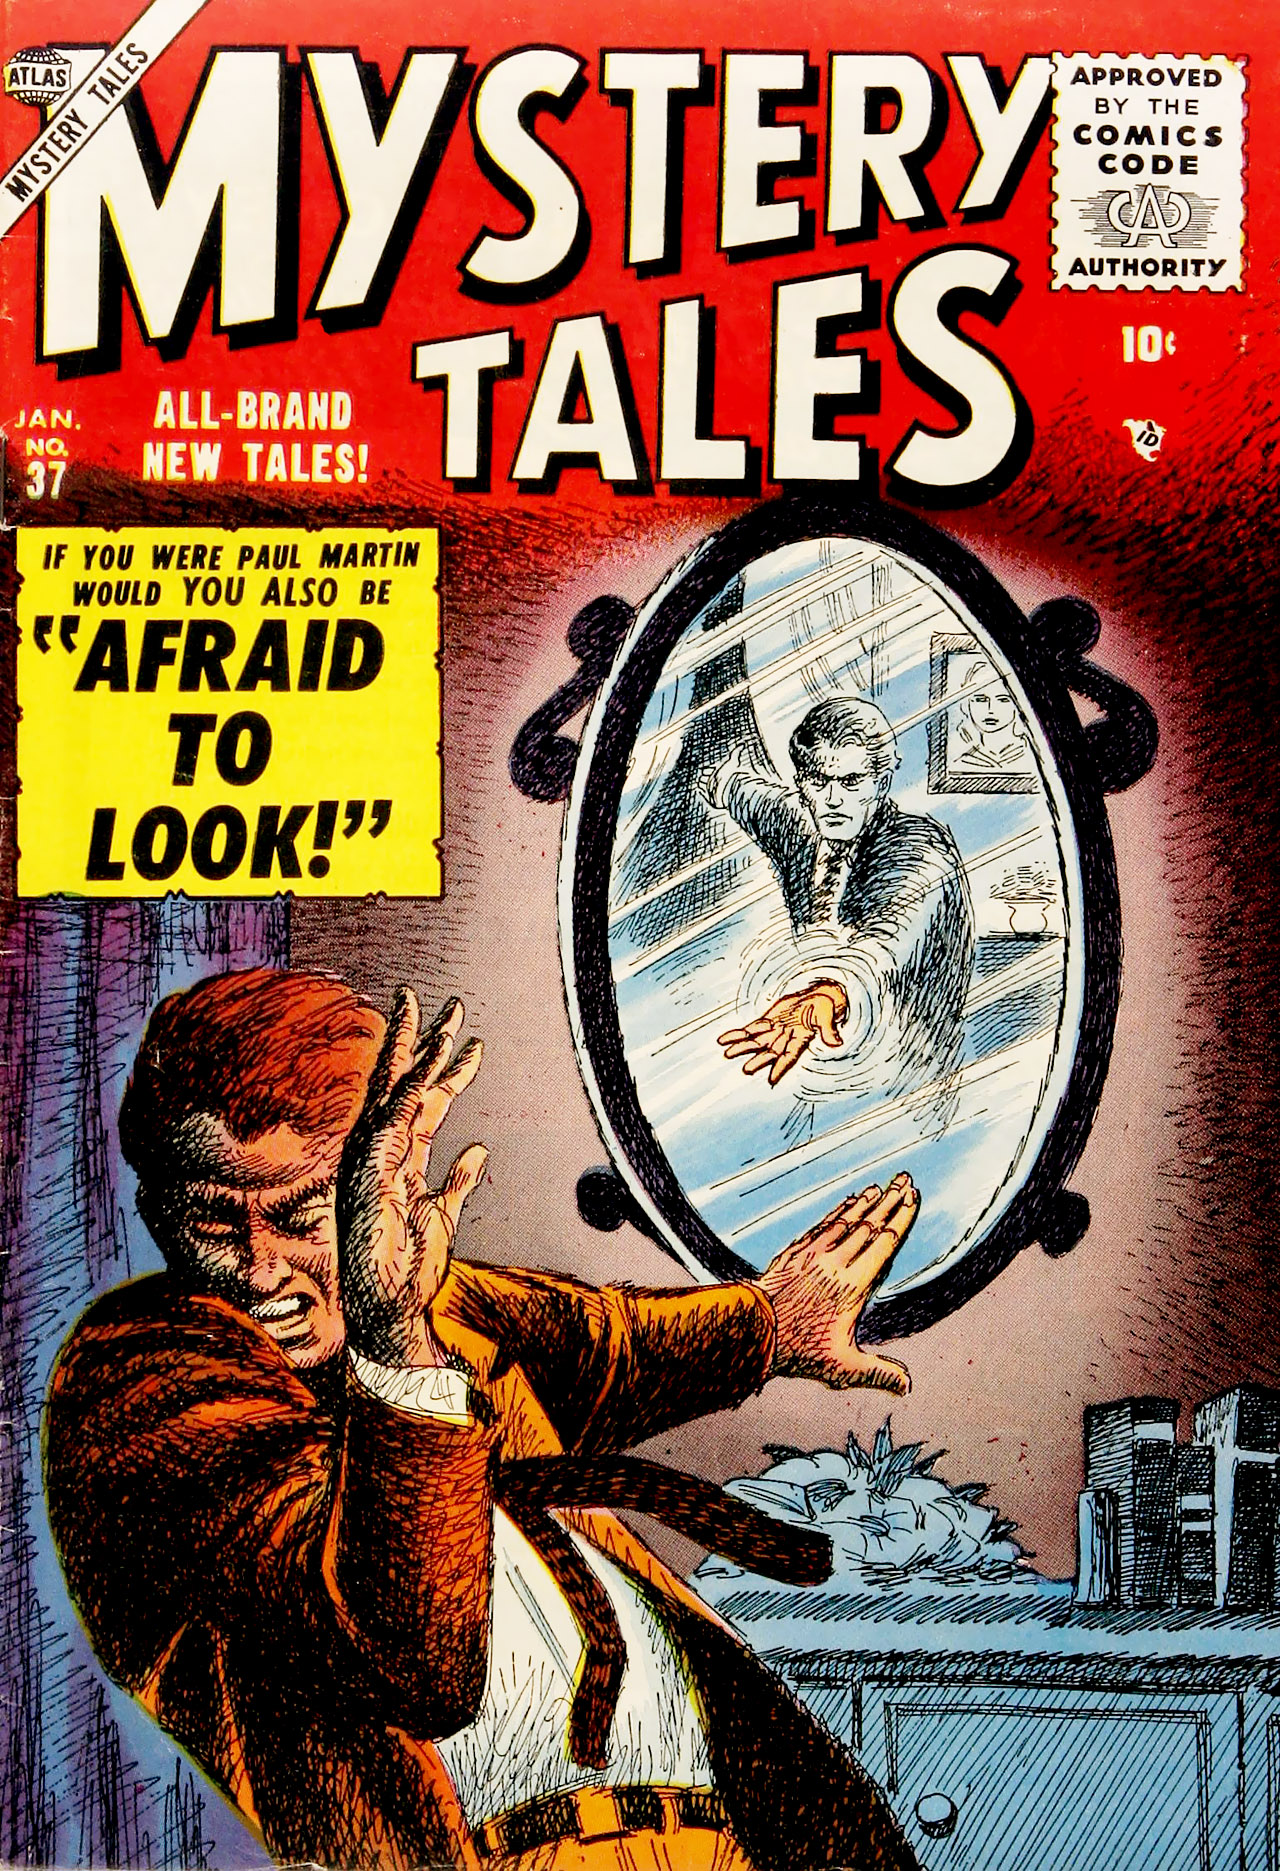 Read online Mystery Tales comic -  Issue #37 - 1